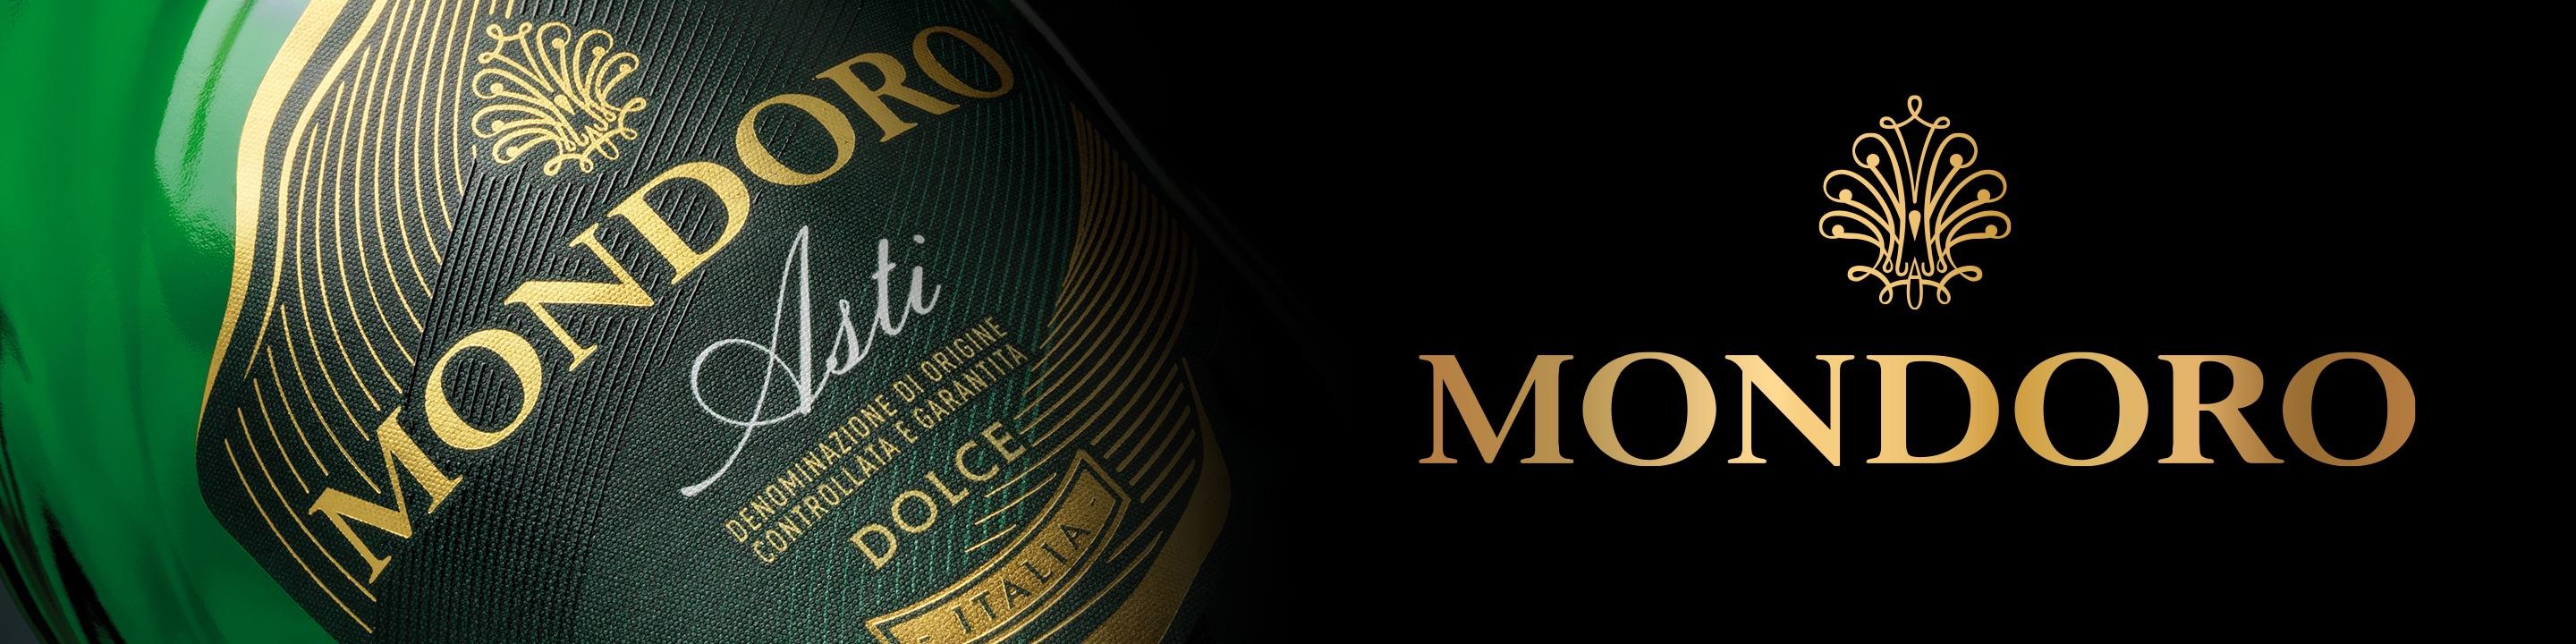 Mondoro is an Italian superior quality sparkling wine range. Its elegant taste and prestigious, sensual bottle design are a symbol of taste and style. Through the years, Mondoro has won more gold medals for taste and quality than any other Asti. Its 11 golds, 11 silvers and 12 bronzes make it the most highly acclaimed of all Italian sparkling wines – and reinforce its position as the world’s finest Asti. Buy Mondoro online now from nearby liquor stores via Minibar Delivery. 